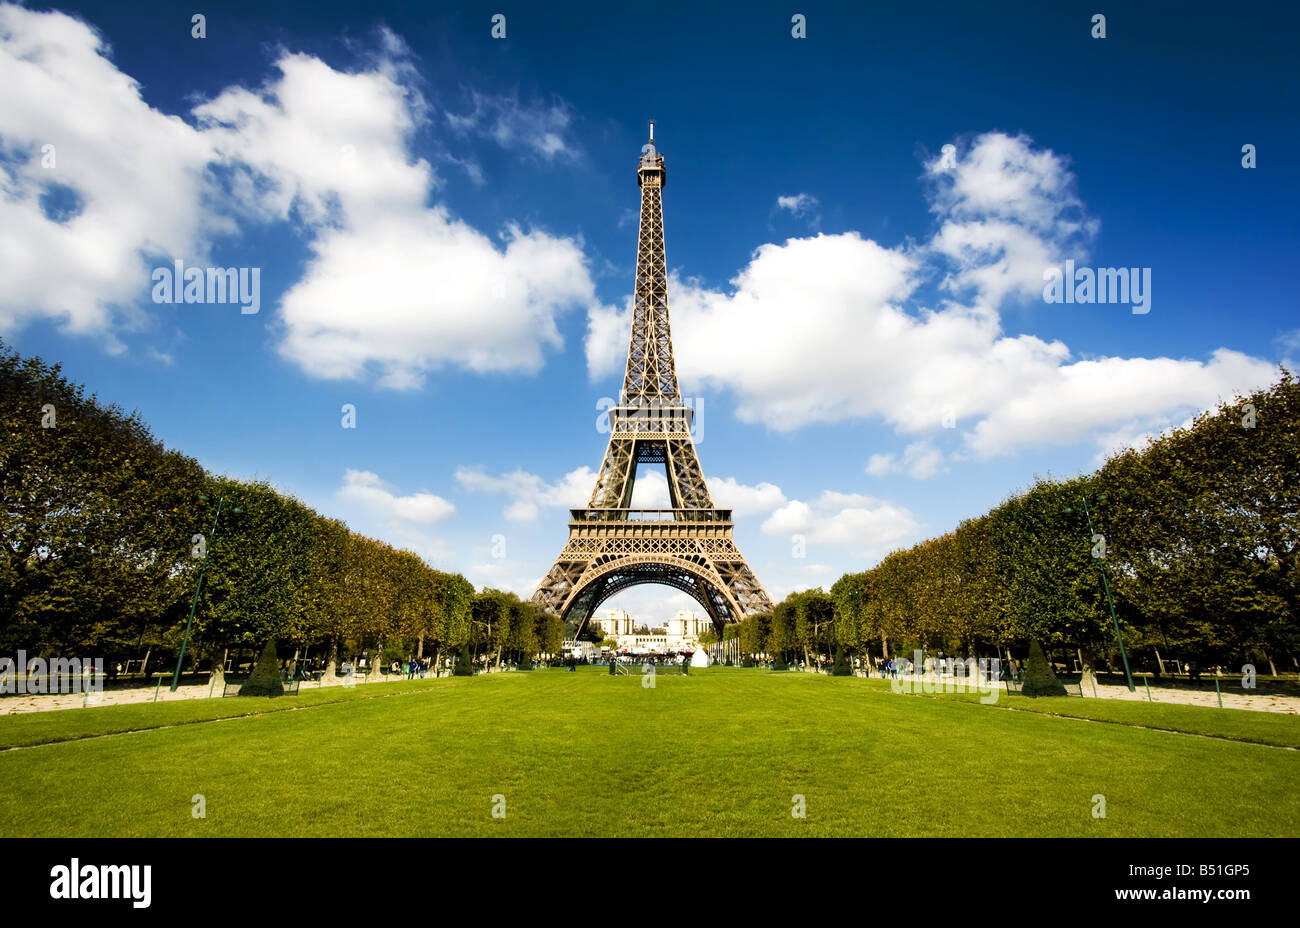 Beautiful photo of the Eiffel tower in Paris with gorgeous colors and wide angle central perspective Stock Photo